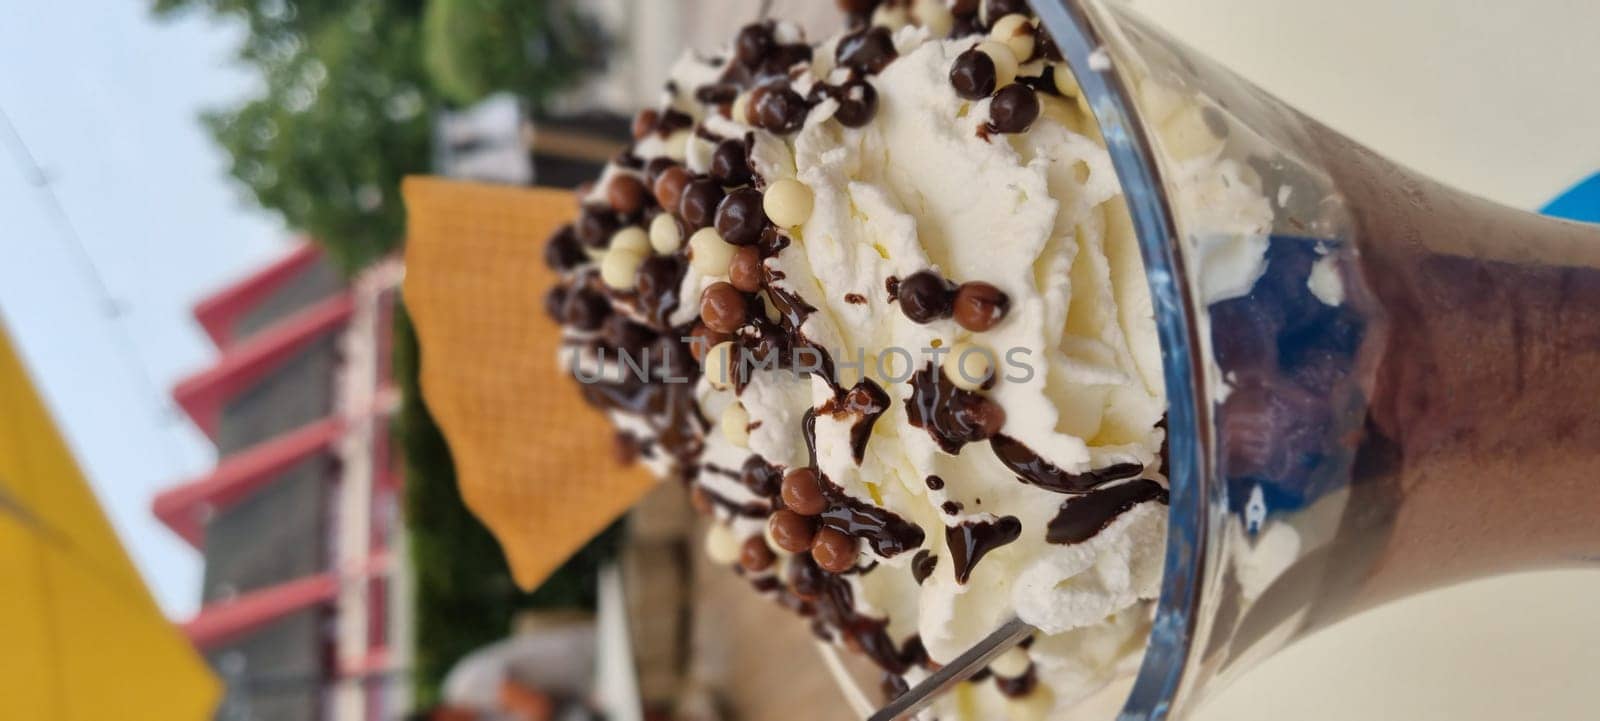 Close-up view of a chocolate sundae topped with whipped cream and chocolate chips